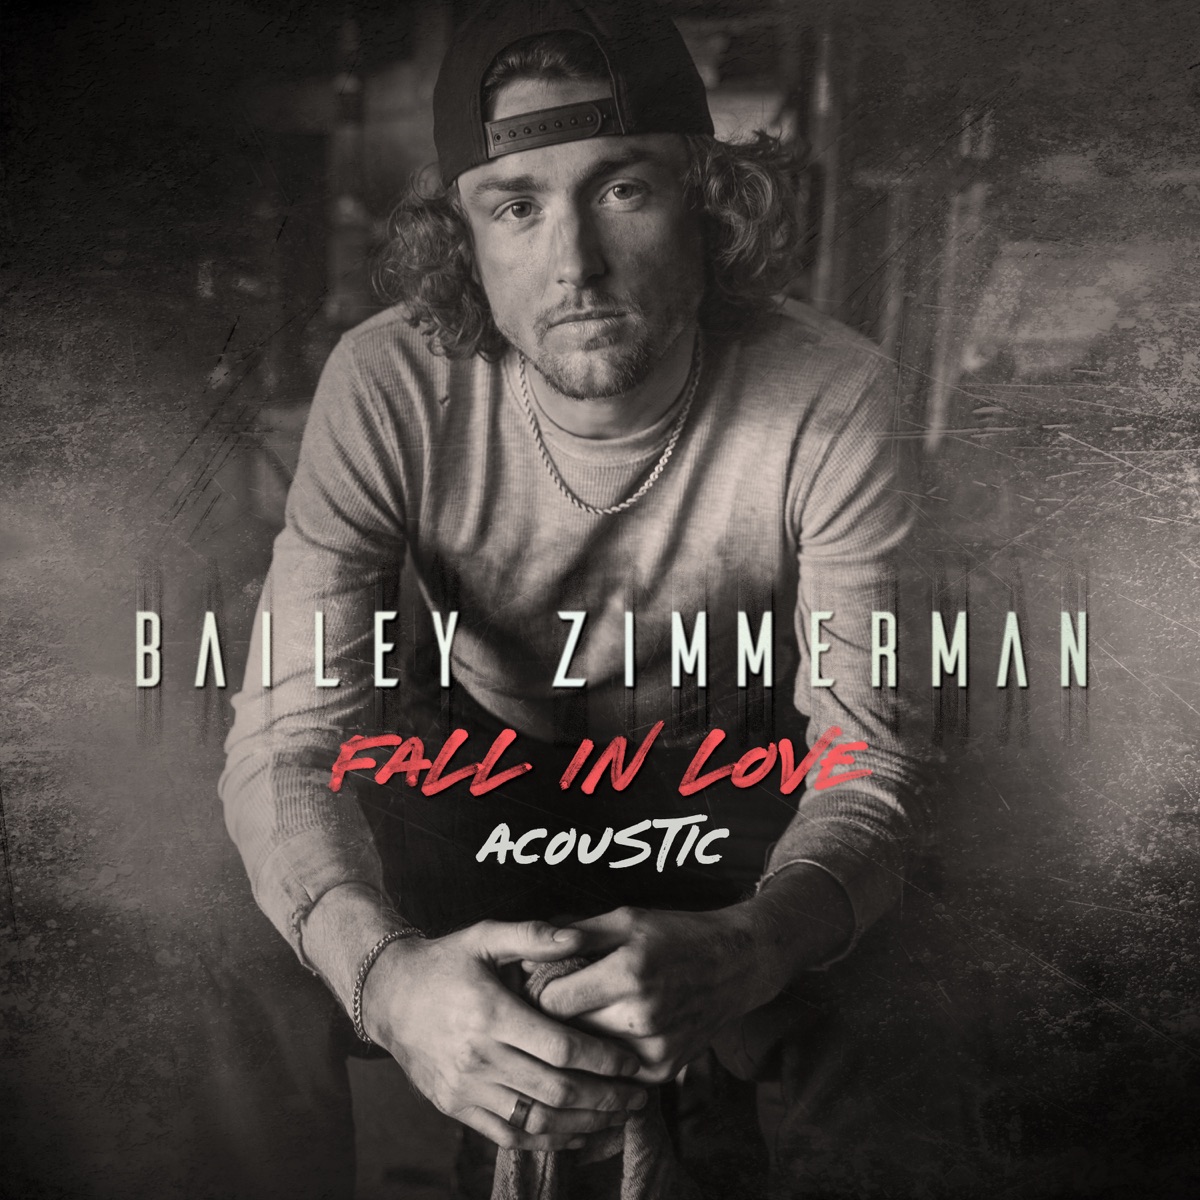 God's Gonna Cut You Down - Single by Bailey Zimmerman on Apple Music